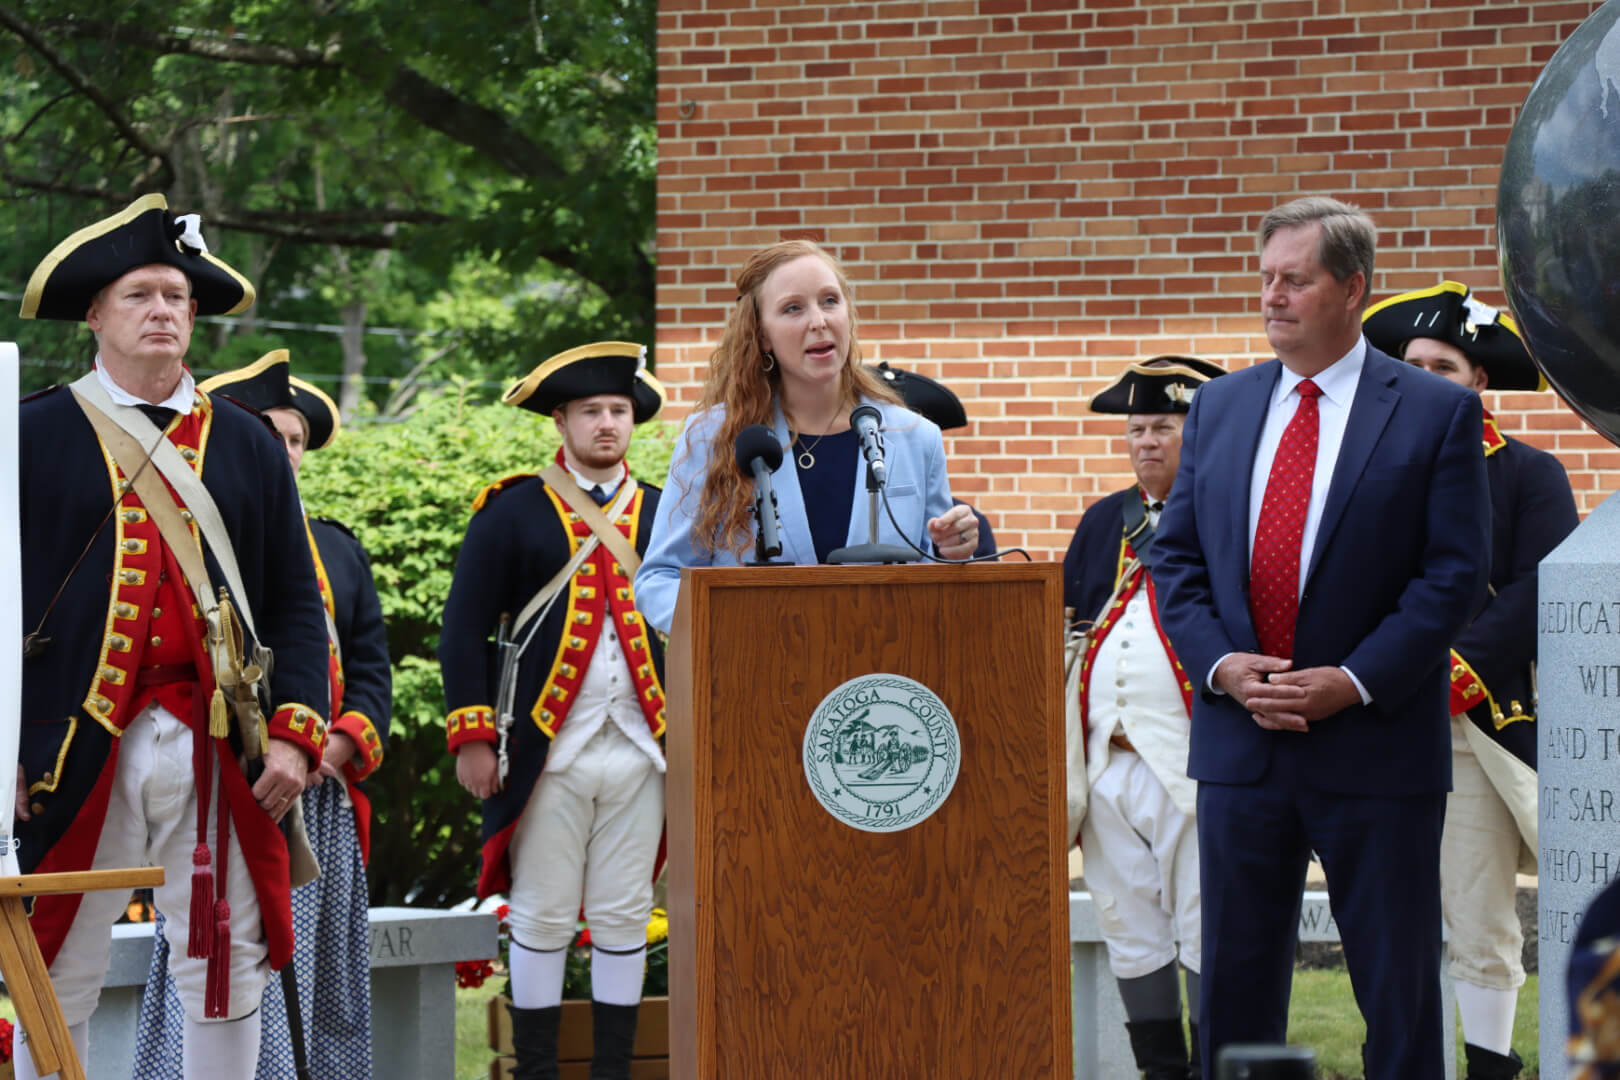 Woman speaking at a podium during a press conference with Revolutionary War reenactors in the background